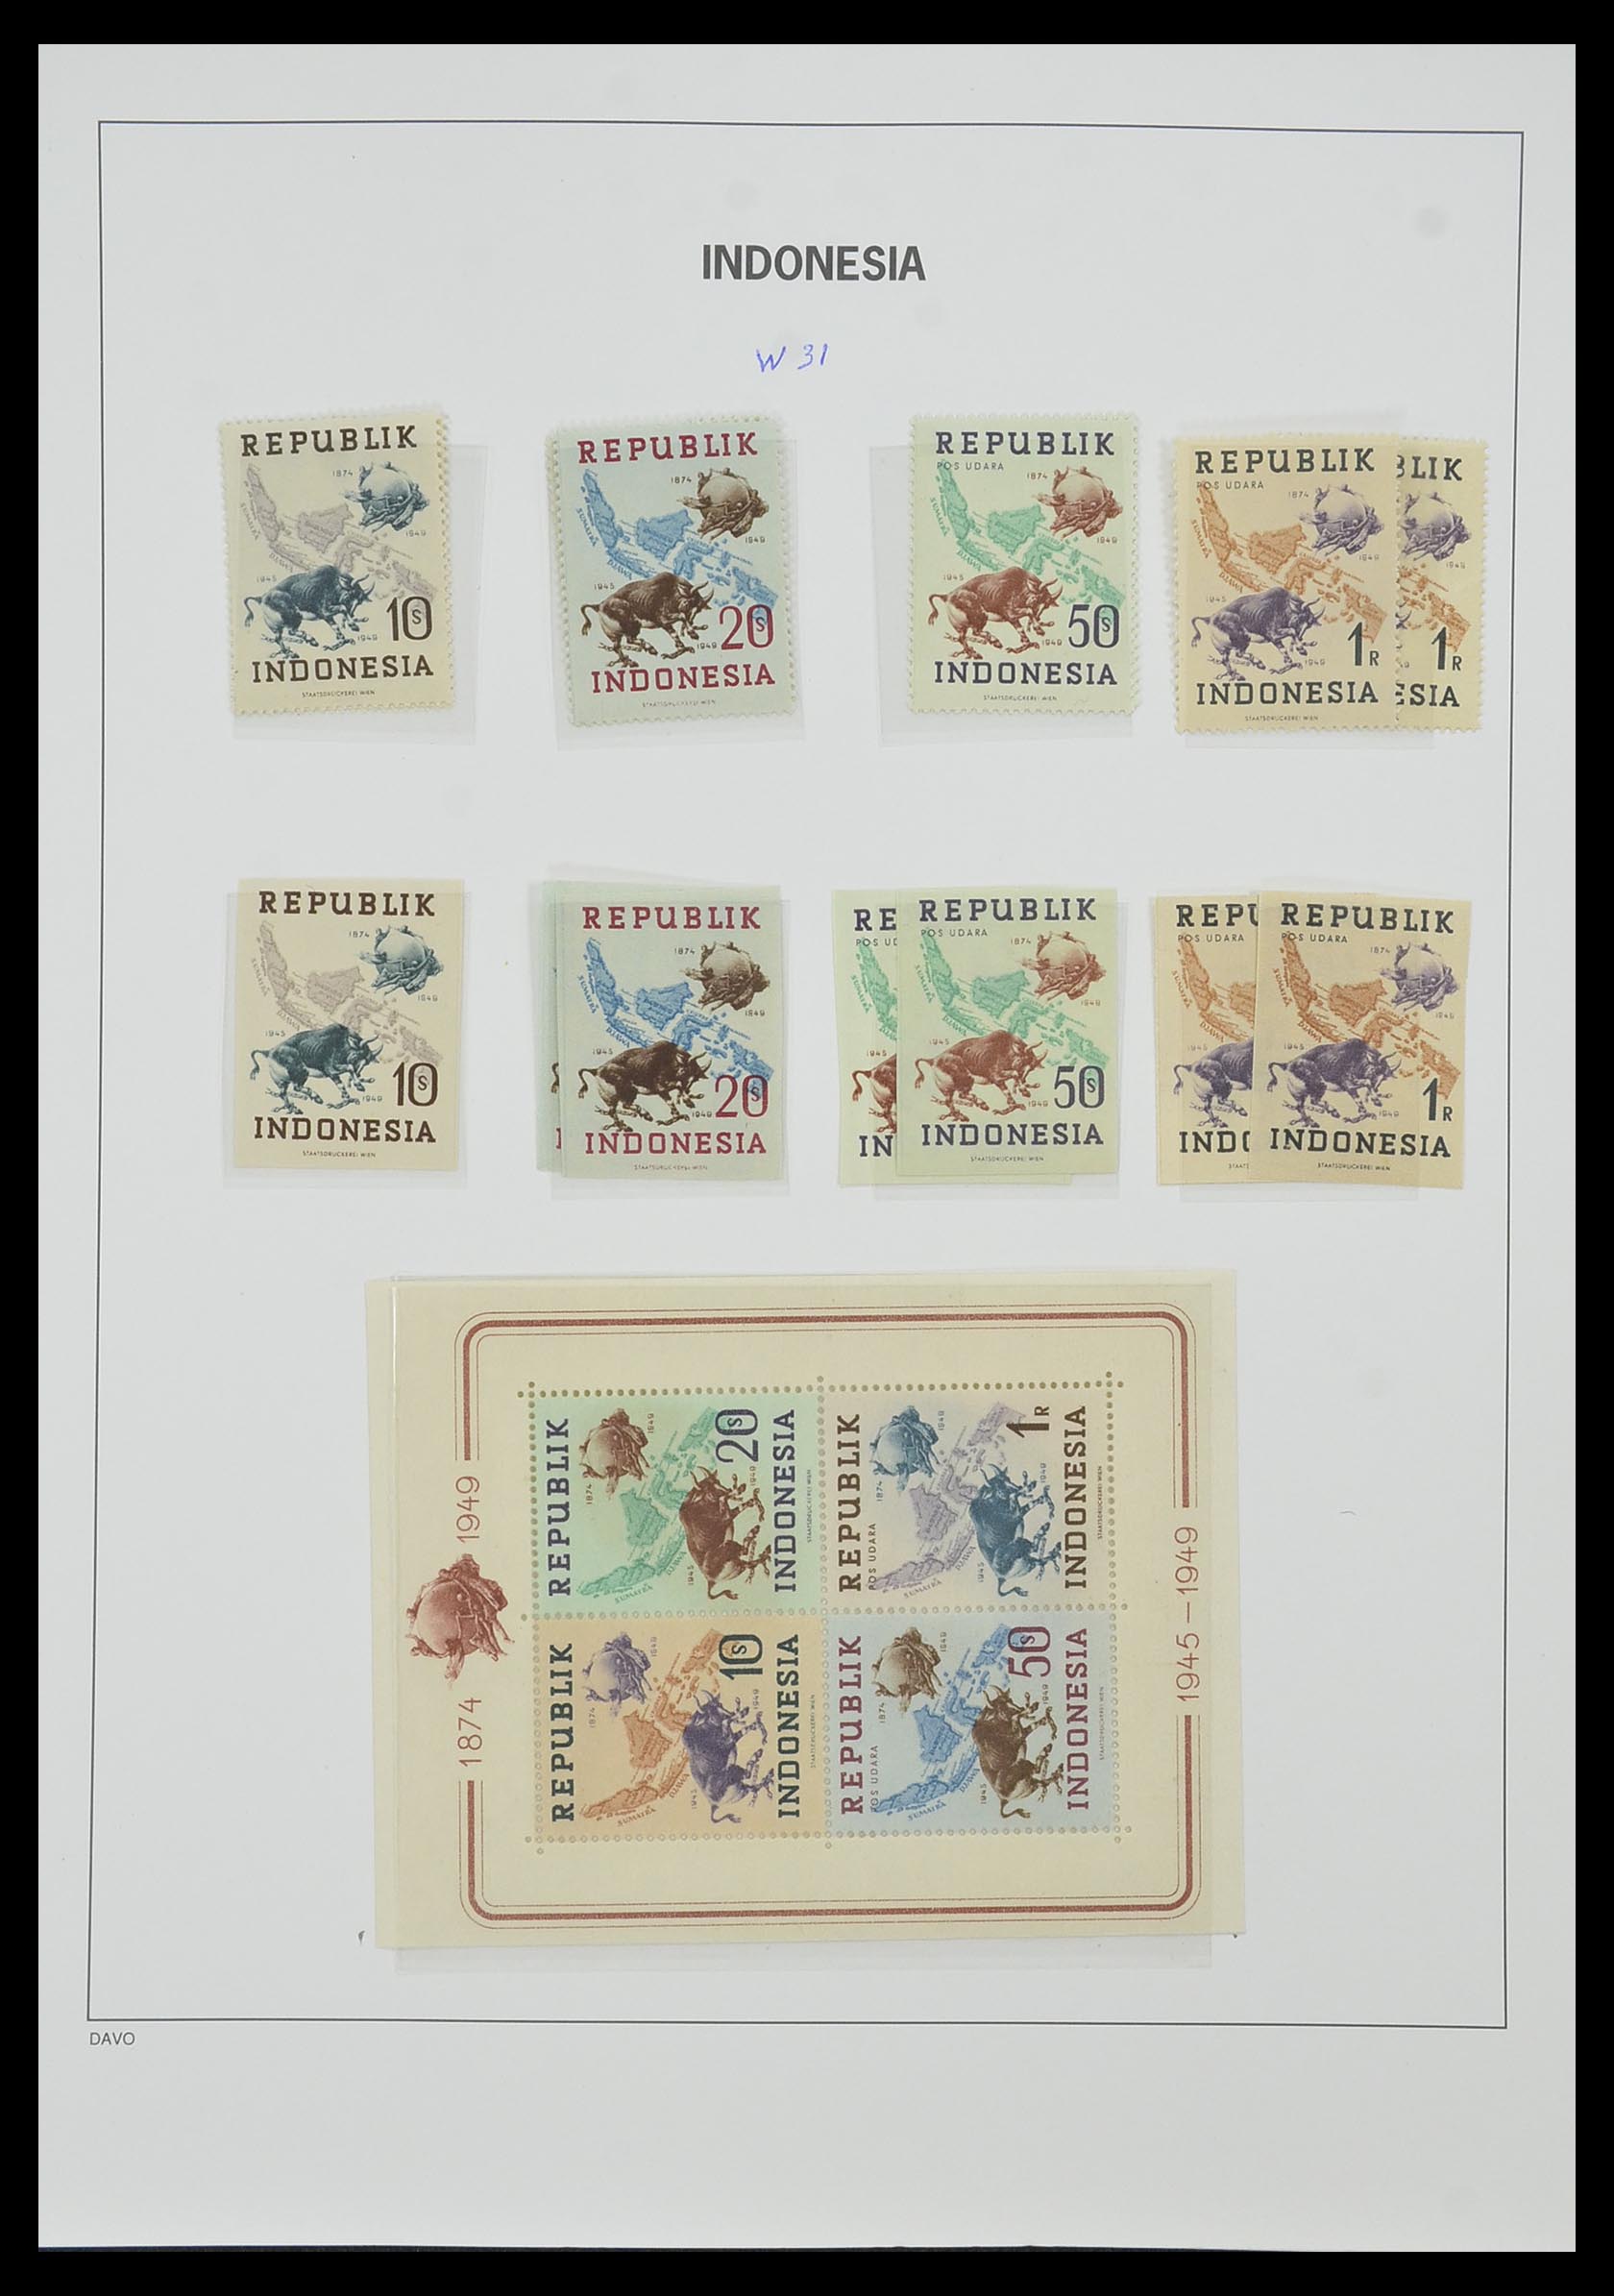 33988 044 - Stamp collection 33988 Vienna printings Indonesia.